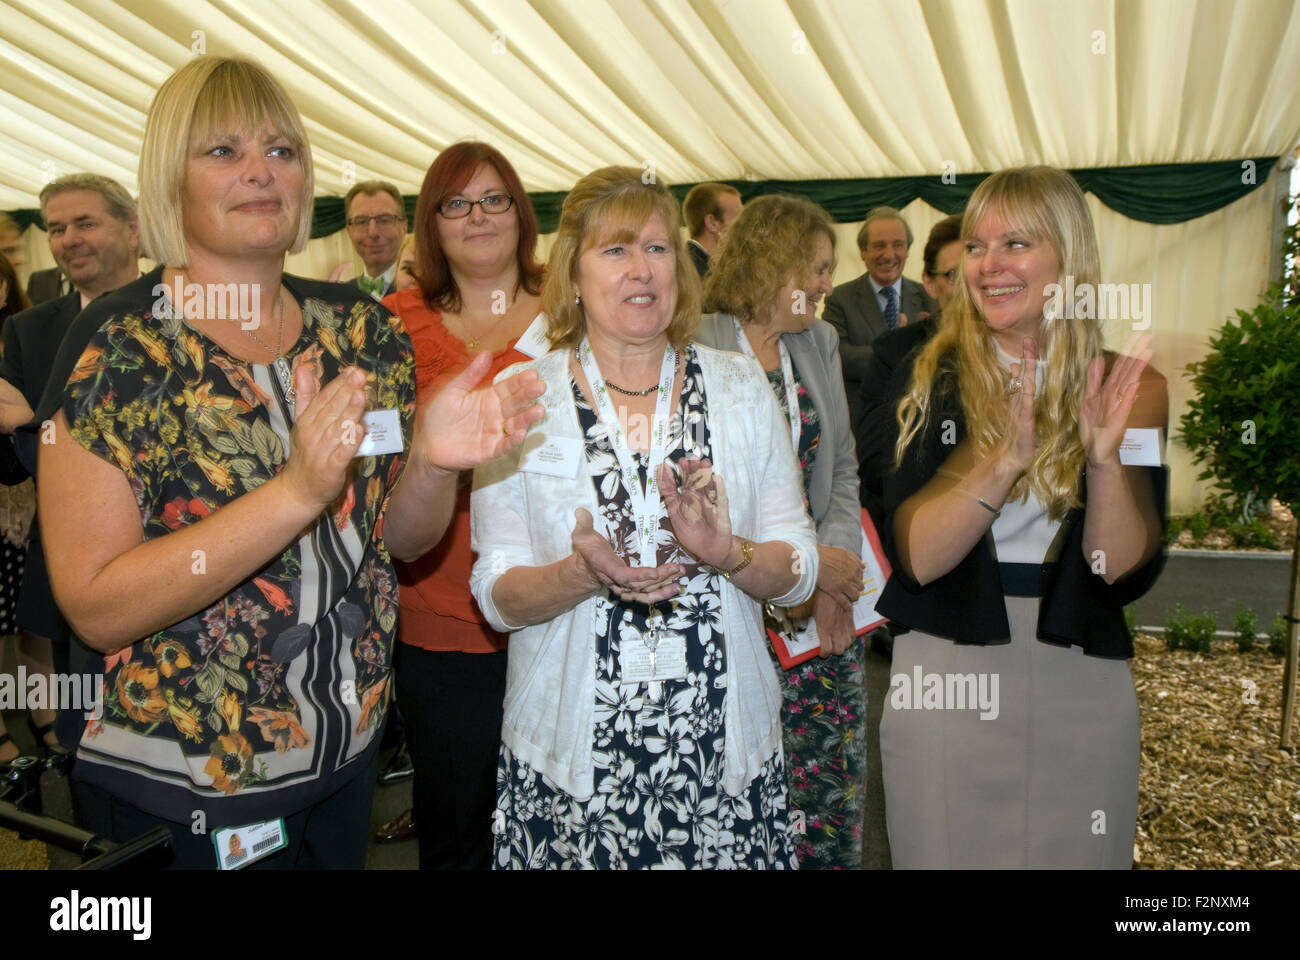 Members of school staff applauding a visit by Her Royal Highness the Countess of Wessex during her visit to Treloar School... Stock Photo